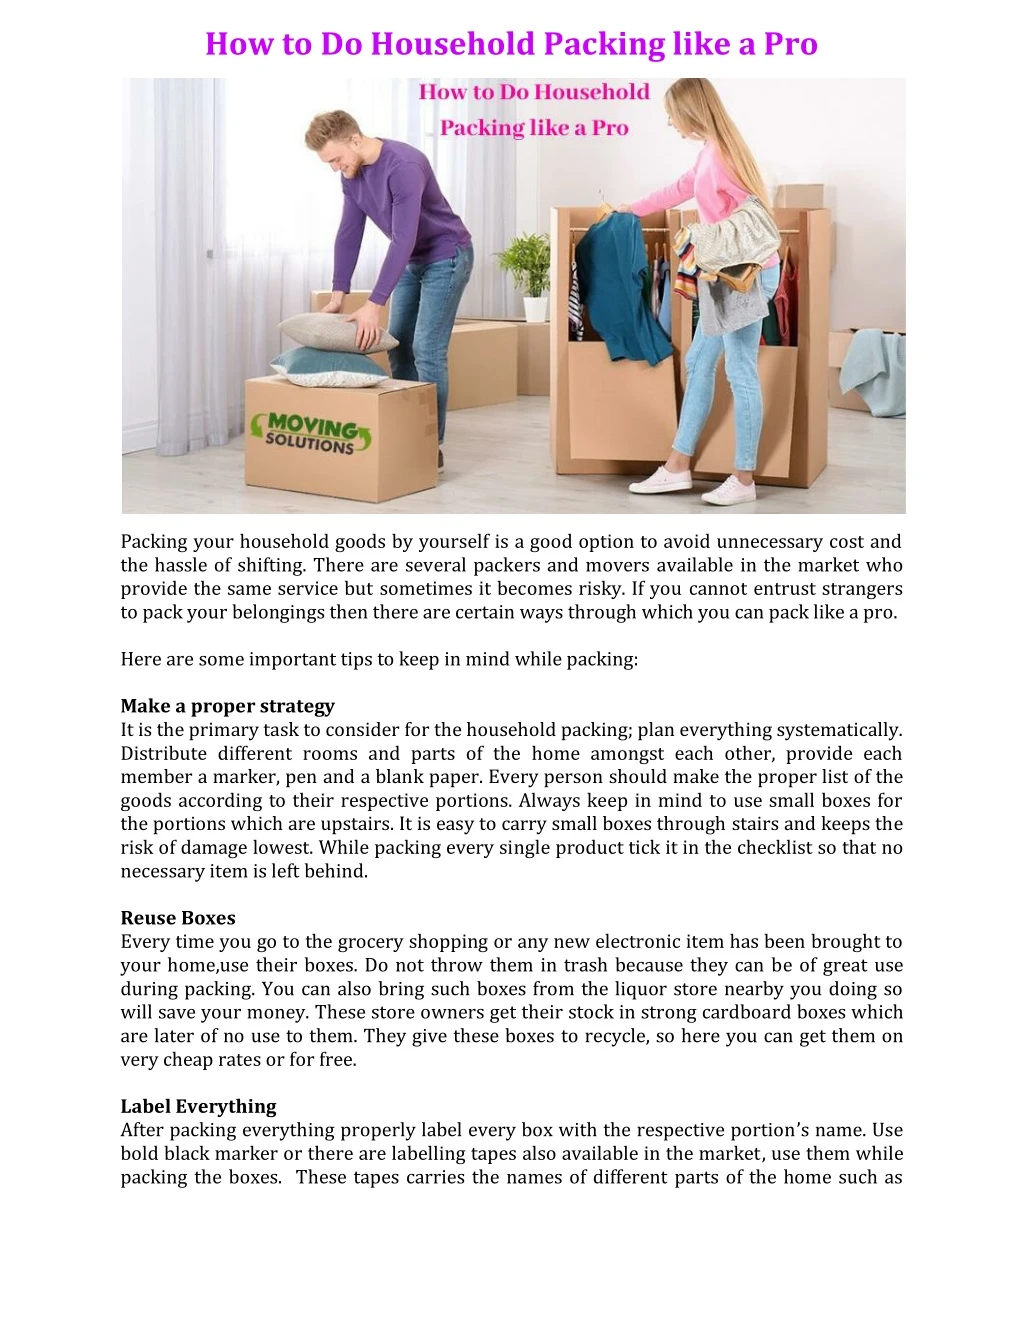 how to do household packing like a pro